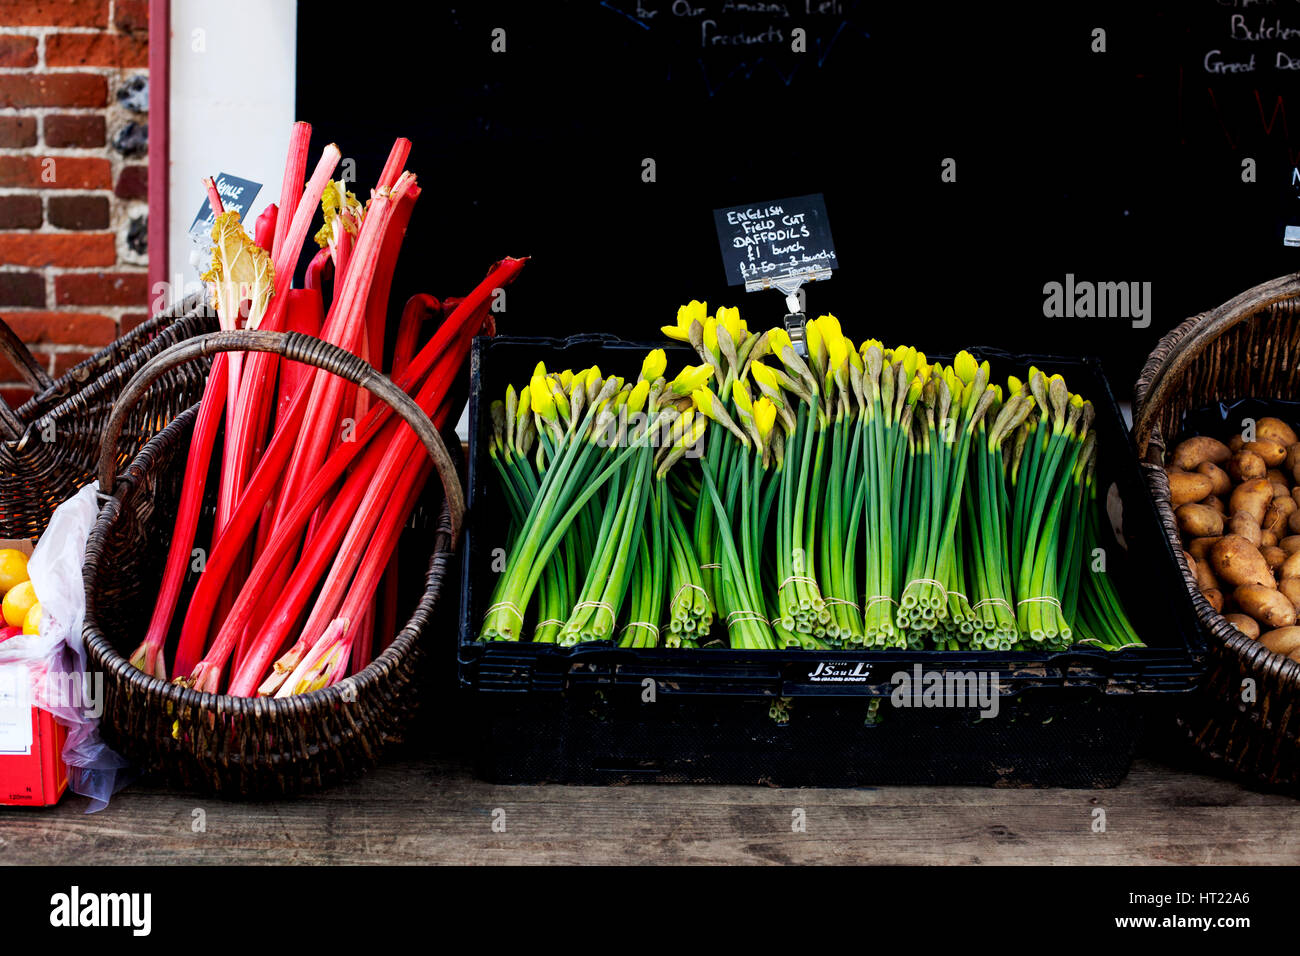 Rhubard and daffodils for sale on country stall, Norfolk, U.K Stock Photo